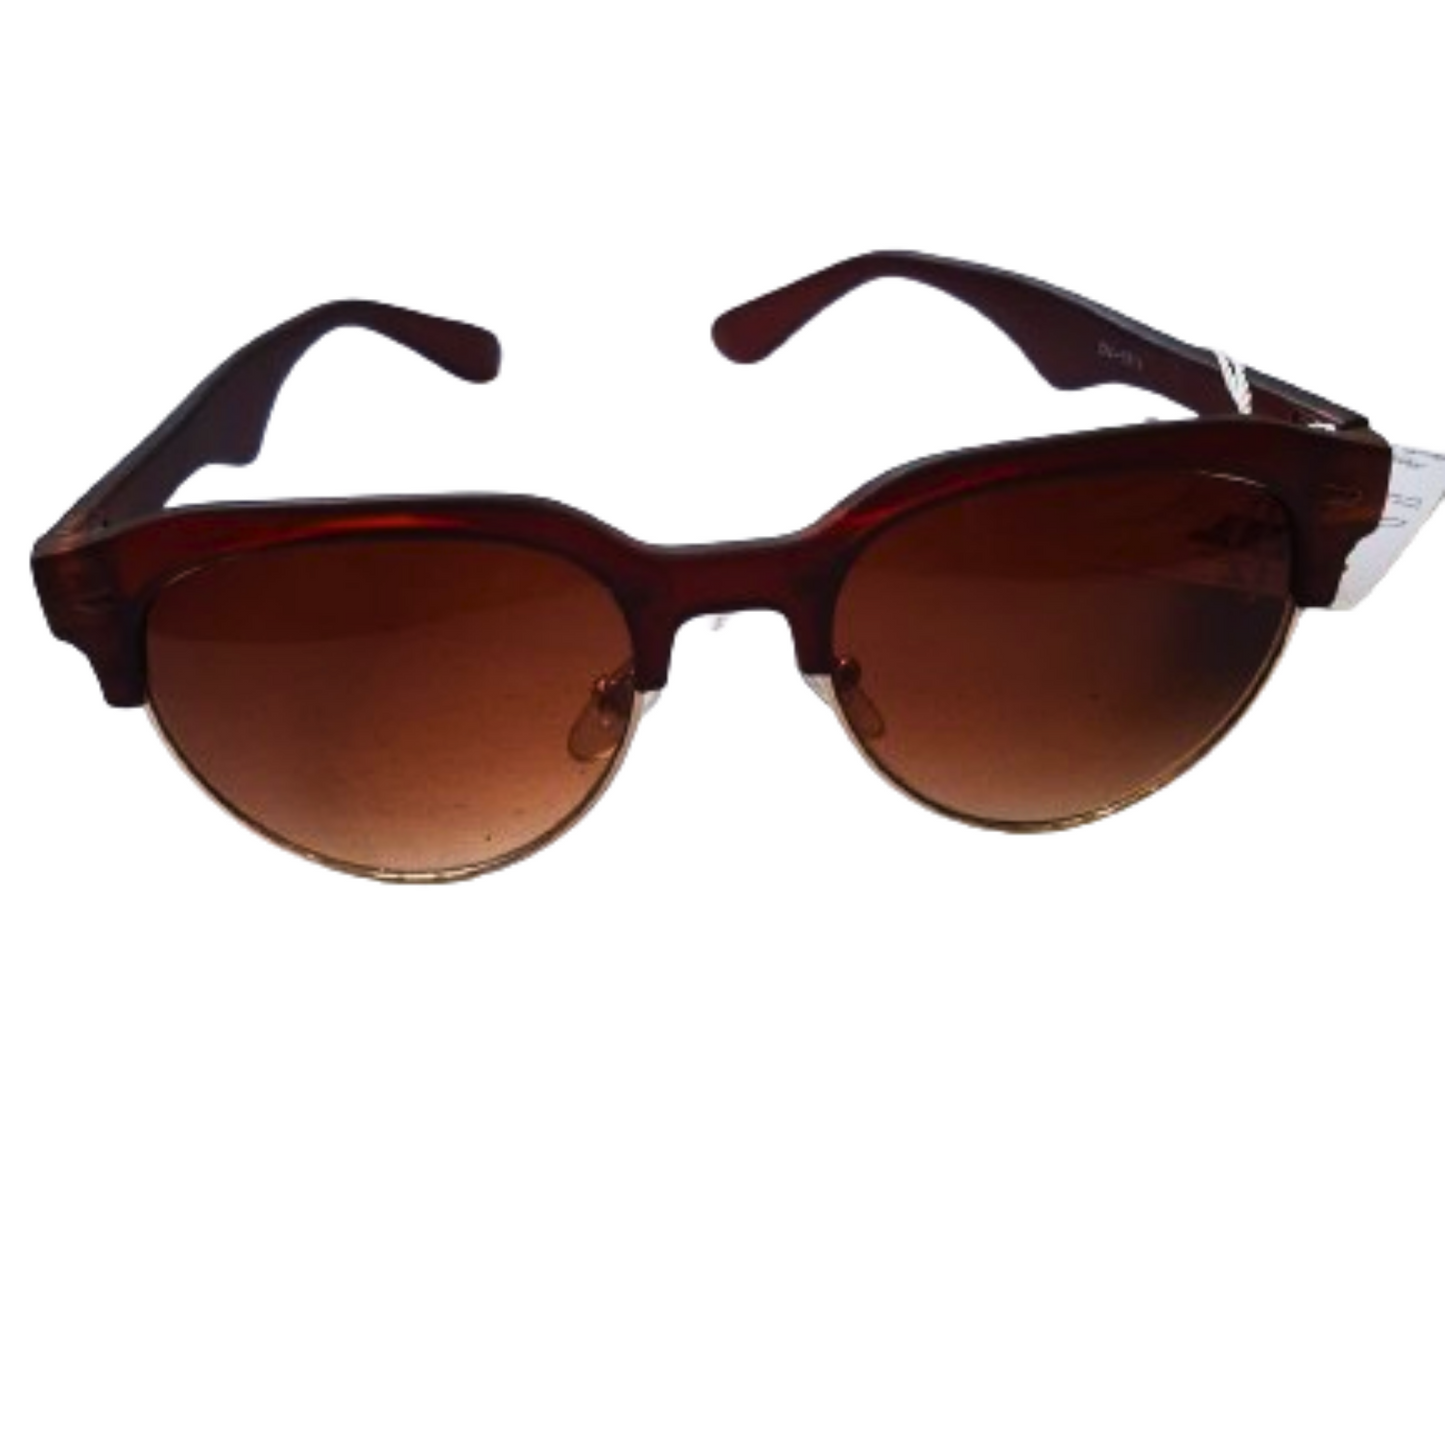 Vintage Round Brown Sunglasses for Women